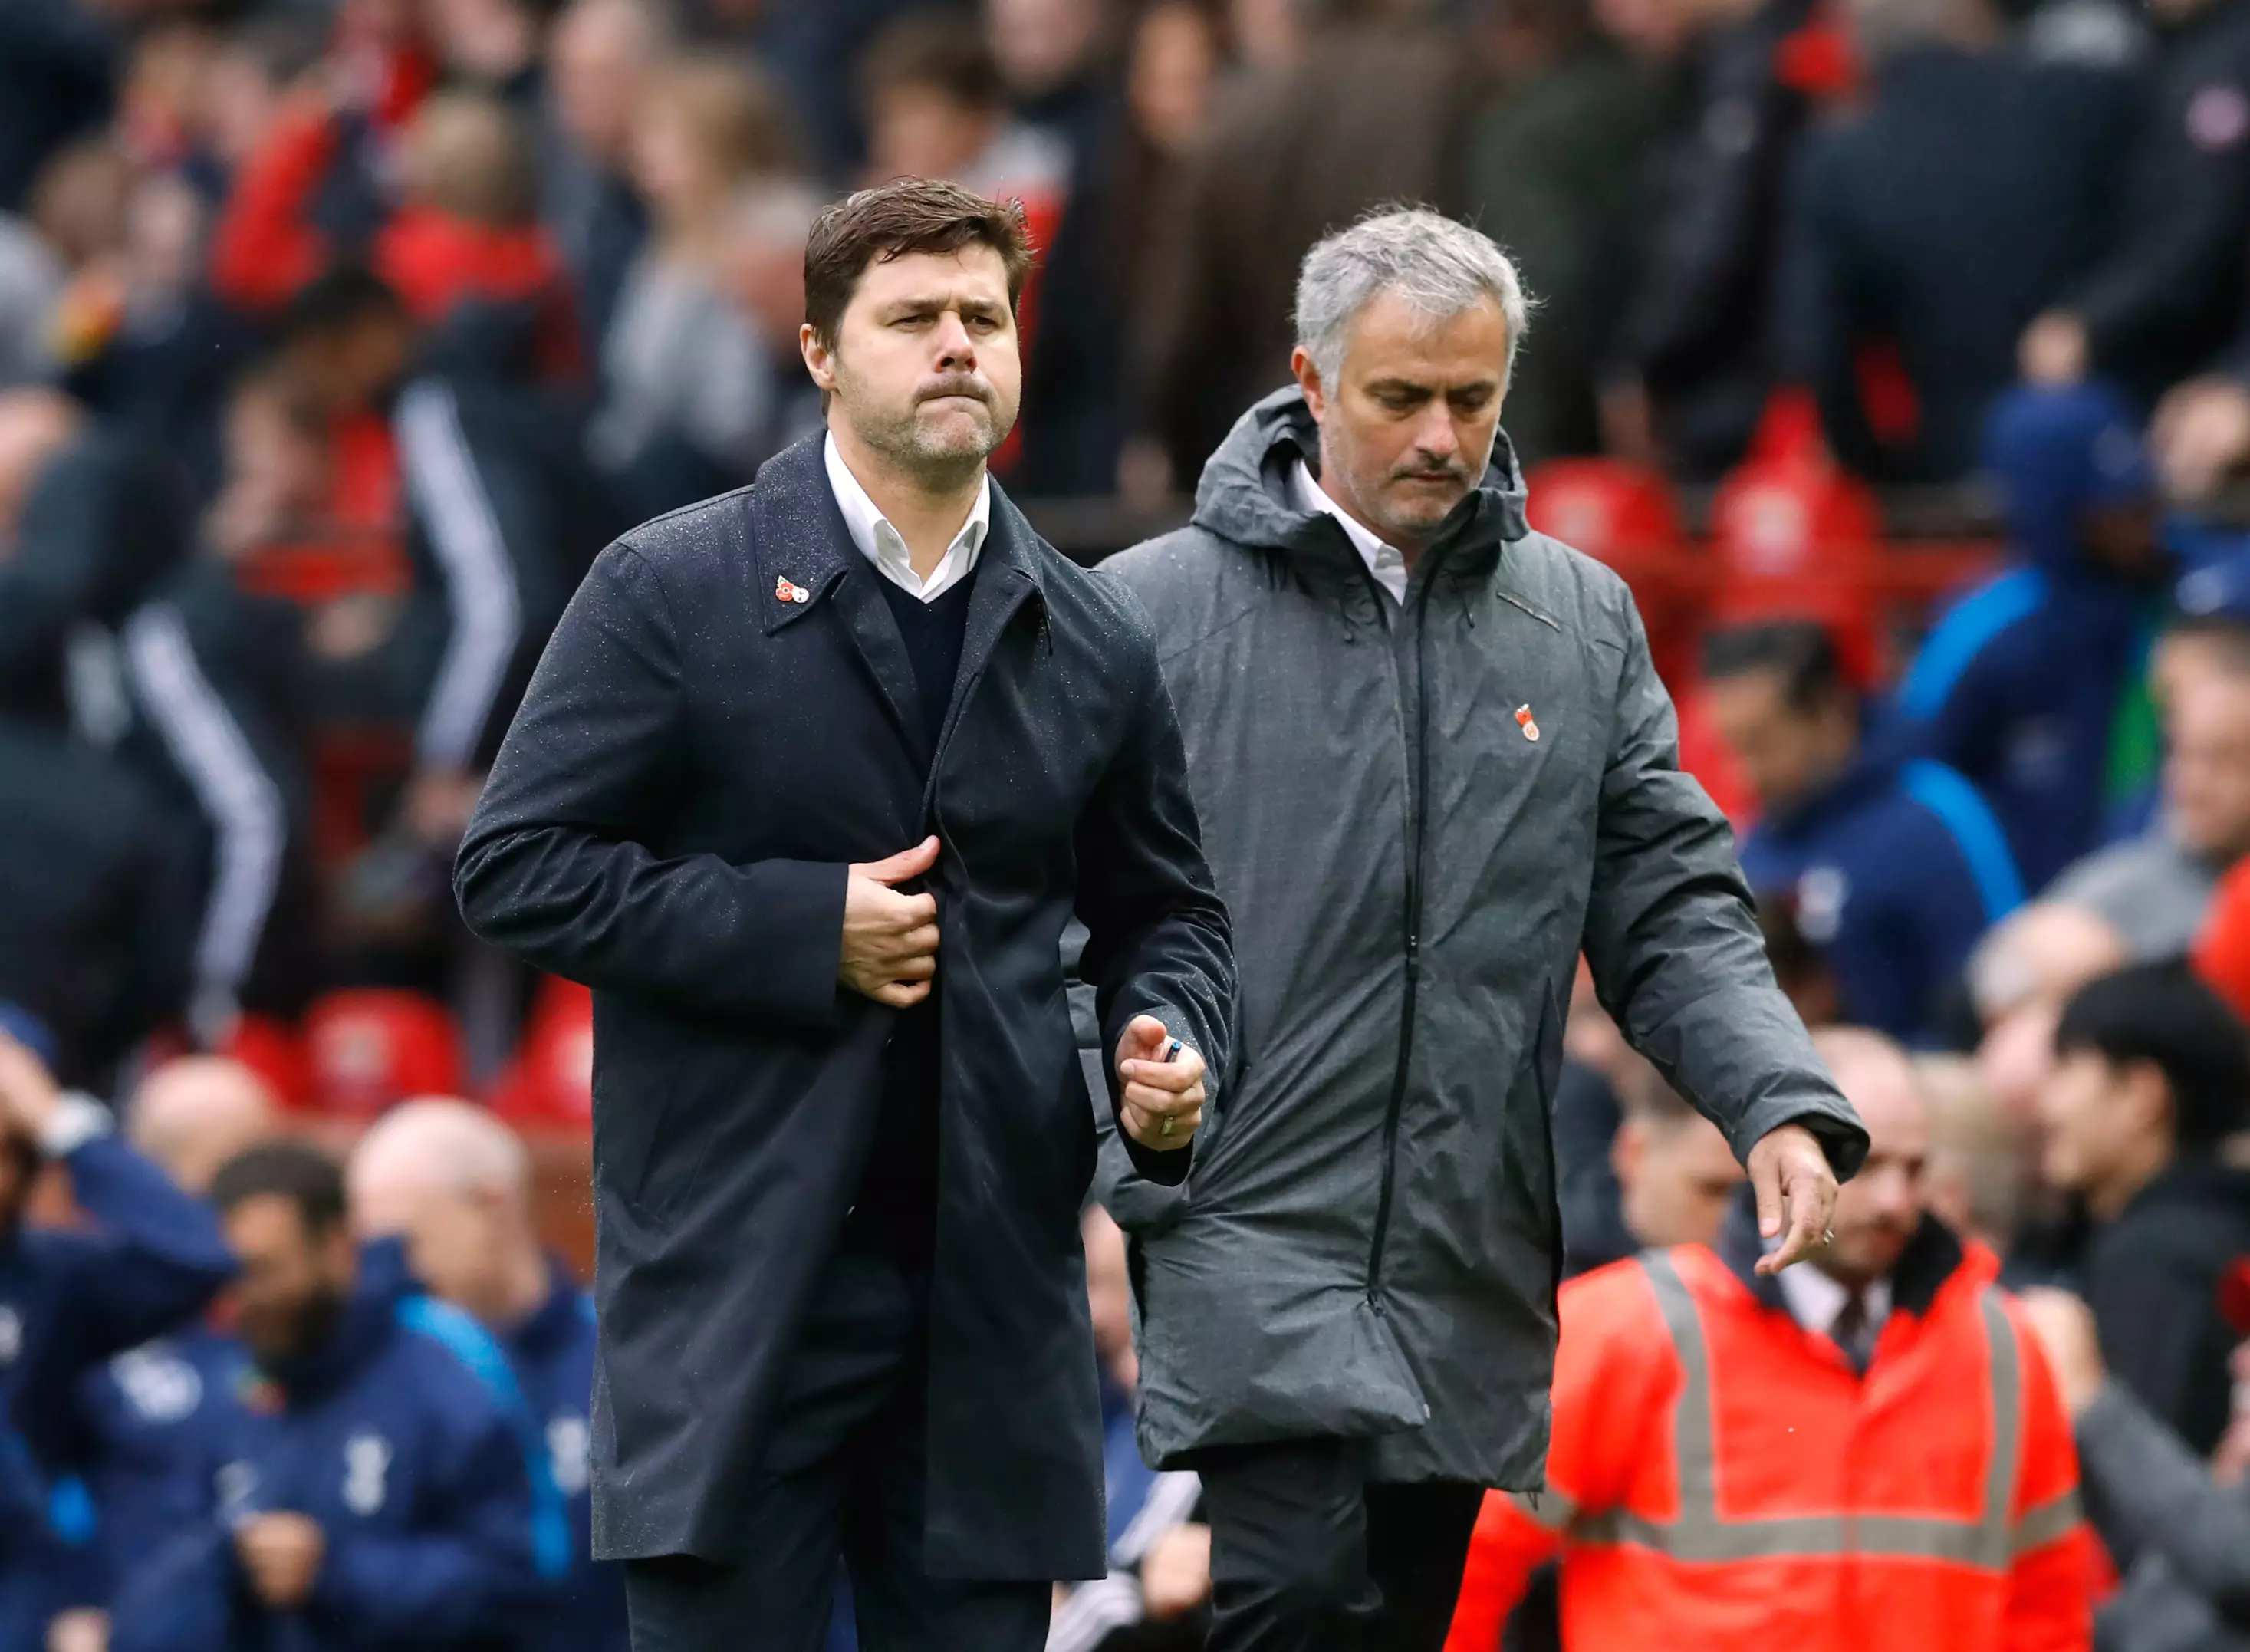 Mourinho has now replaced Pochettino at Spurs after a poor time at United. Image: PA Images